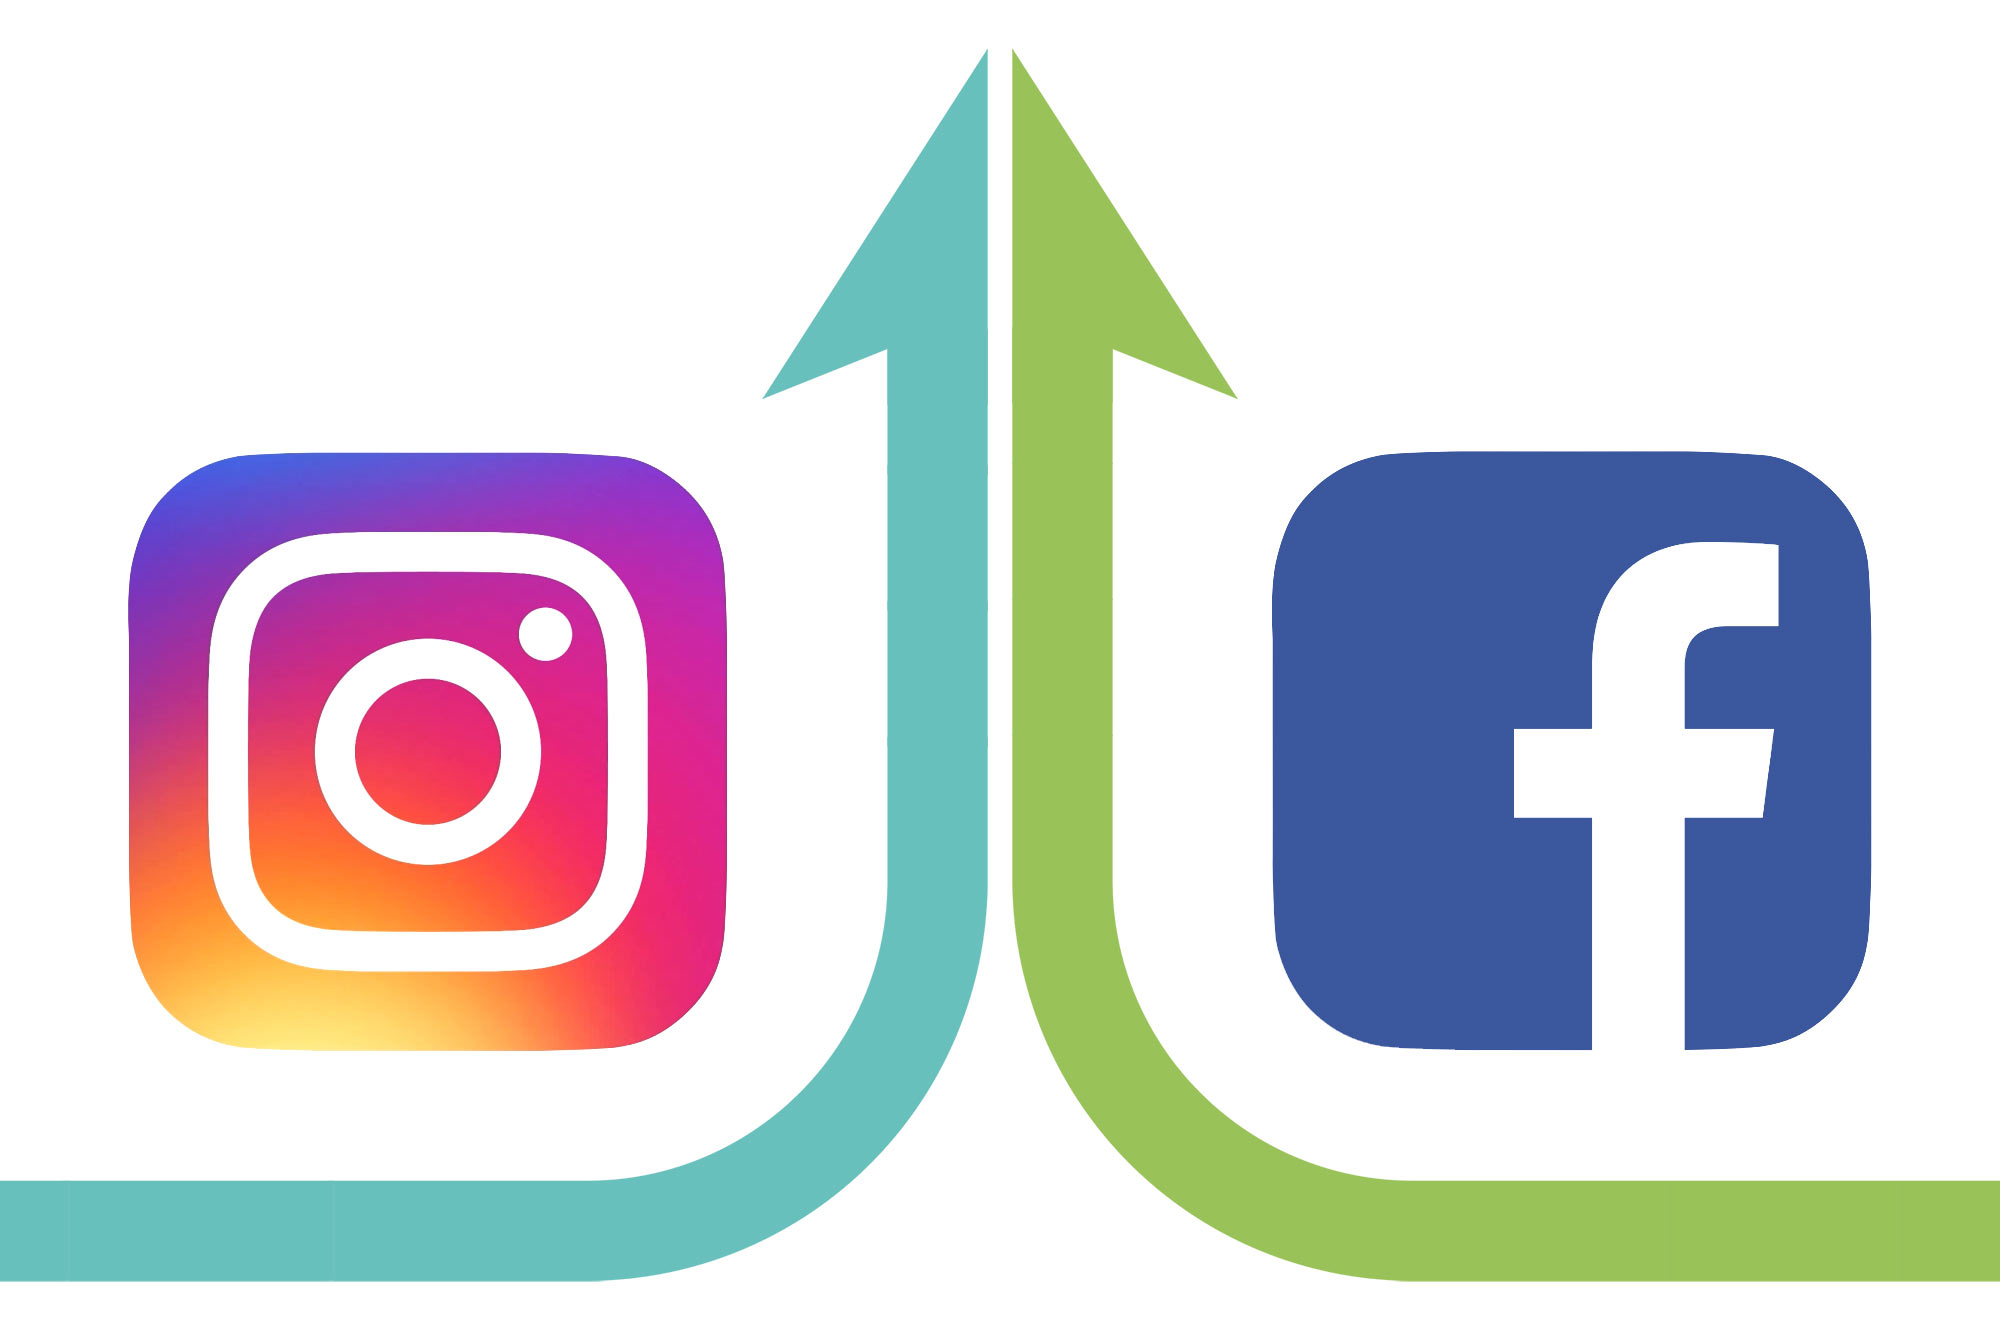 How to Link Your Company’s Instagram Account and Facebook Page